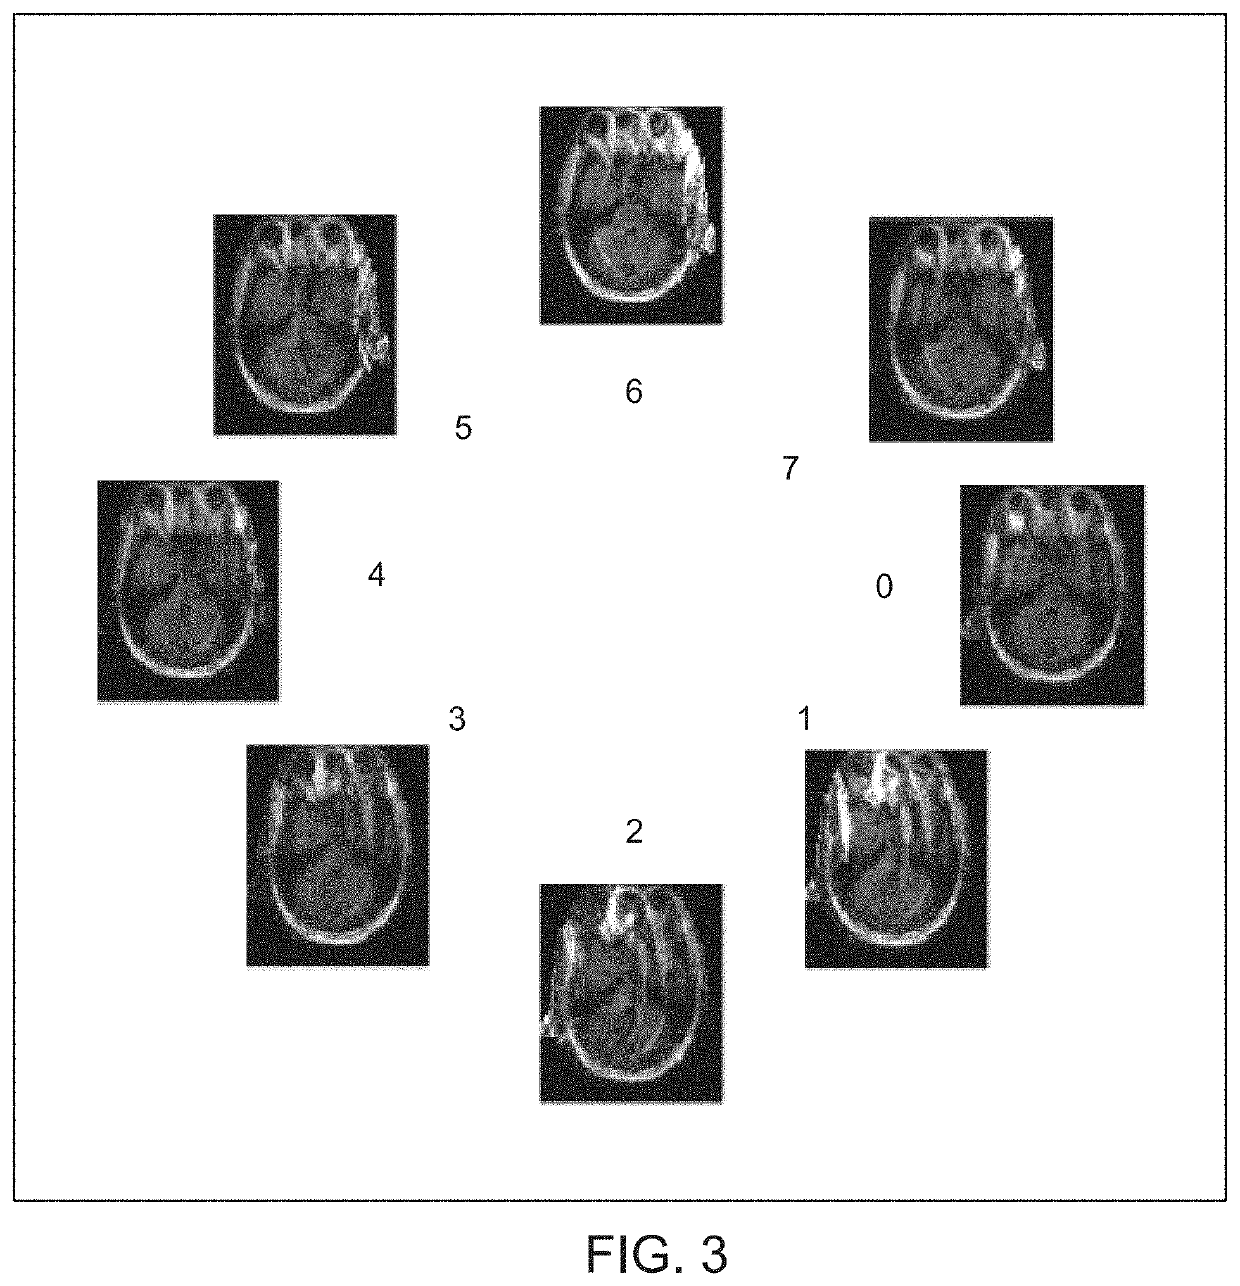 MRI system and method for detection and correction of patient motion